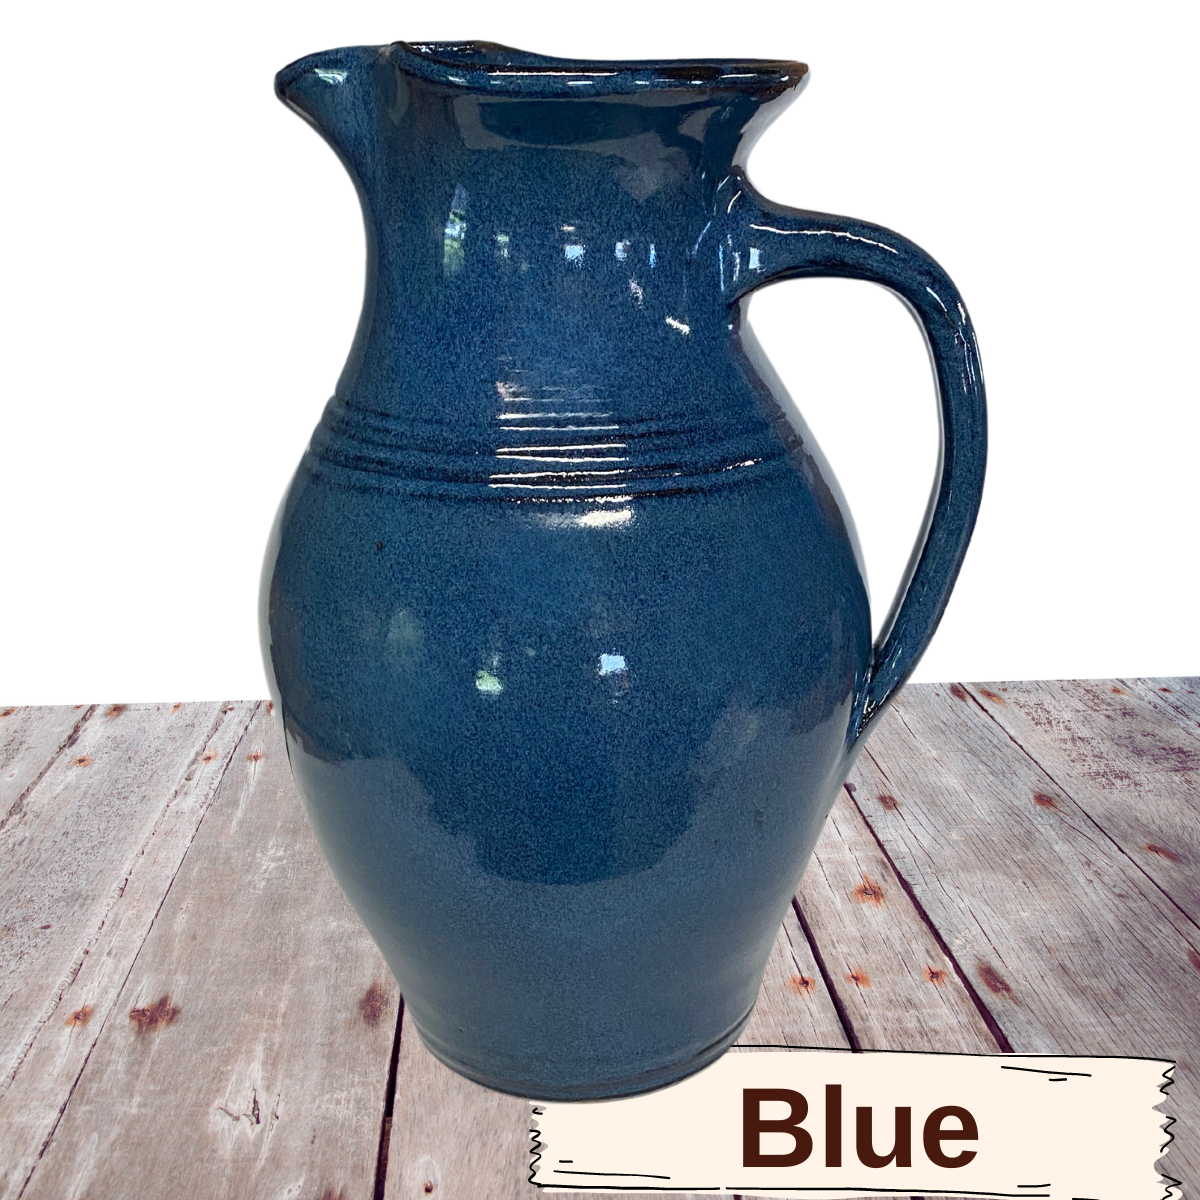 Water or Ice Tea Pitcher large handmade pottery for coffee steep tea pour spout handle